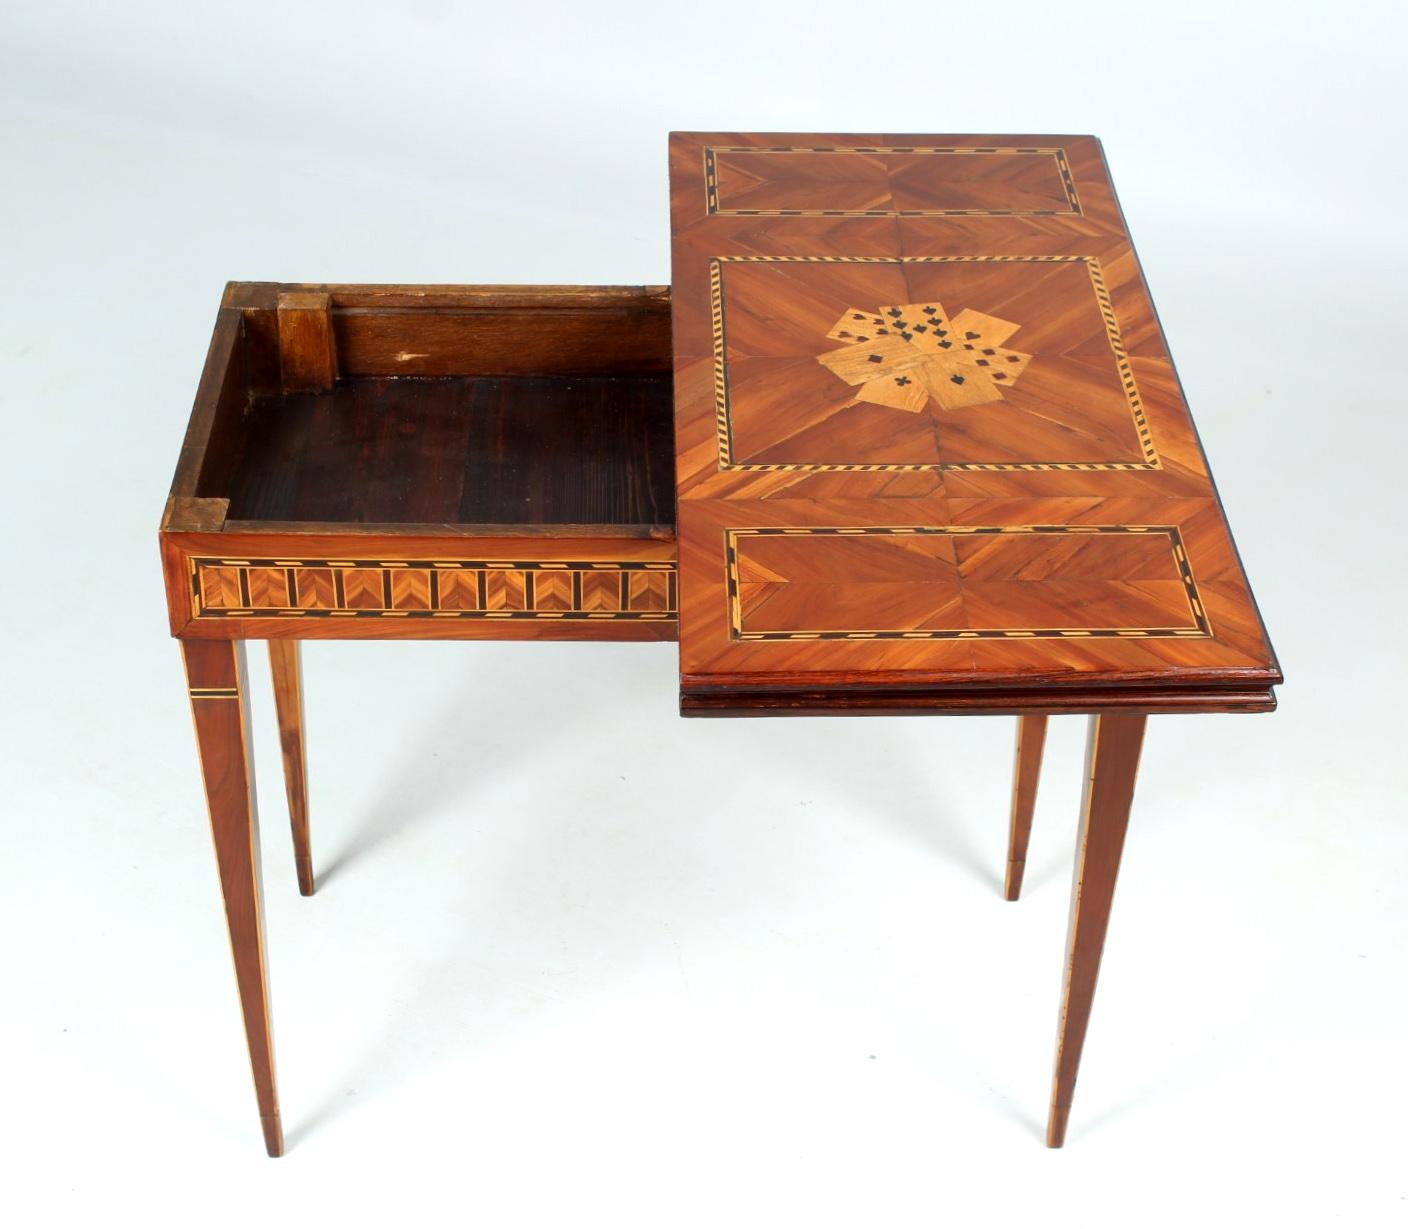 Fruitwood Louis XVI Game Table with Marquetry, circa 1800